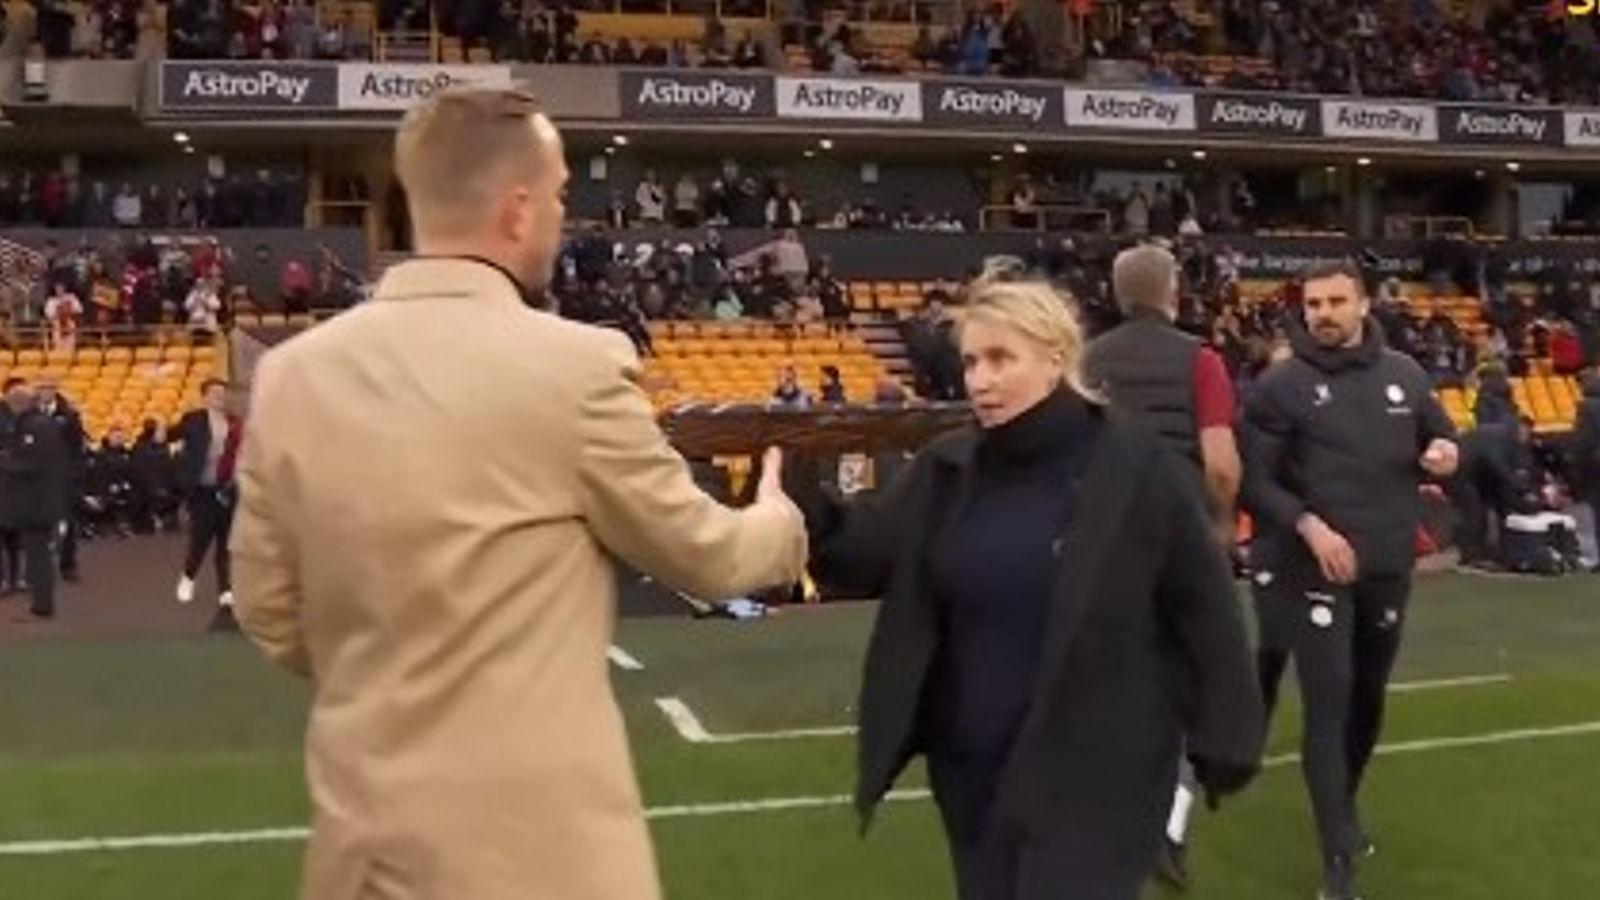 Chelsea Women's boss Emma Hayes appeared to shove Arsenal boss Jonas Eidevall at full-time in the Conti Cup final